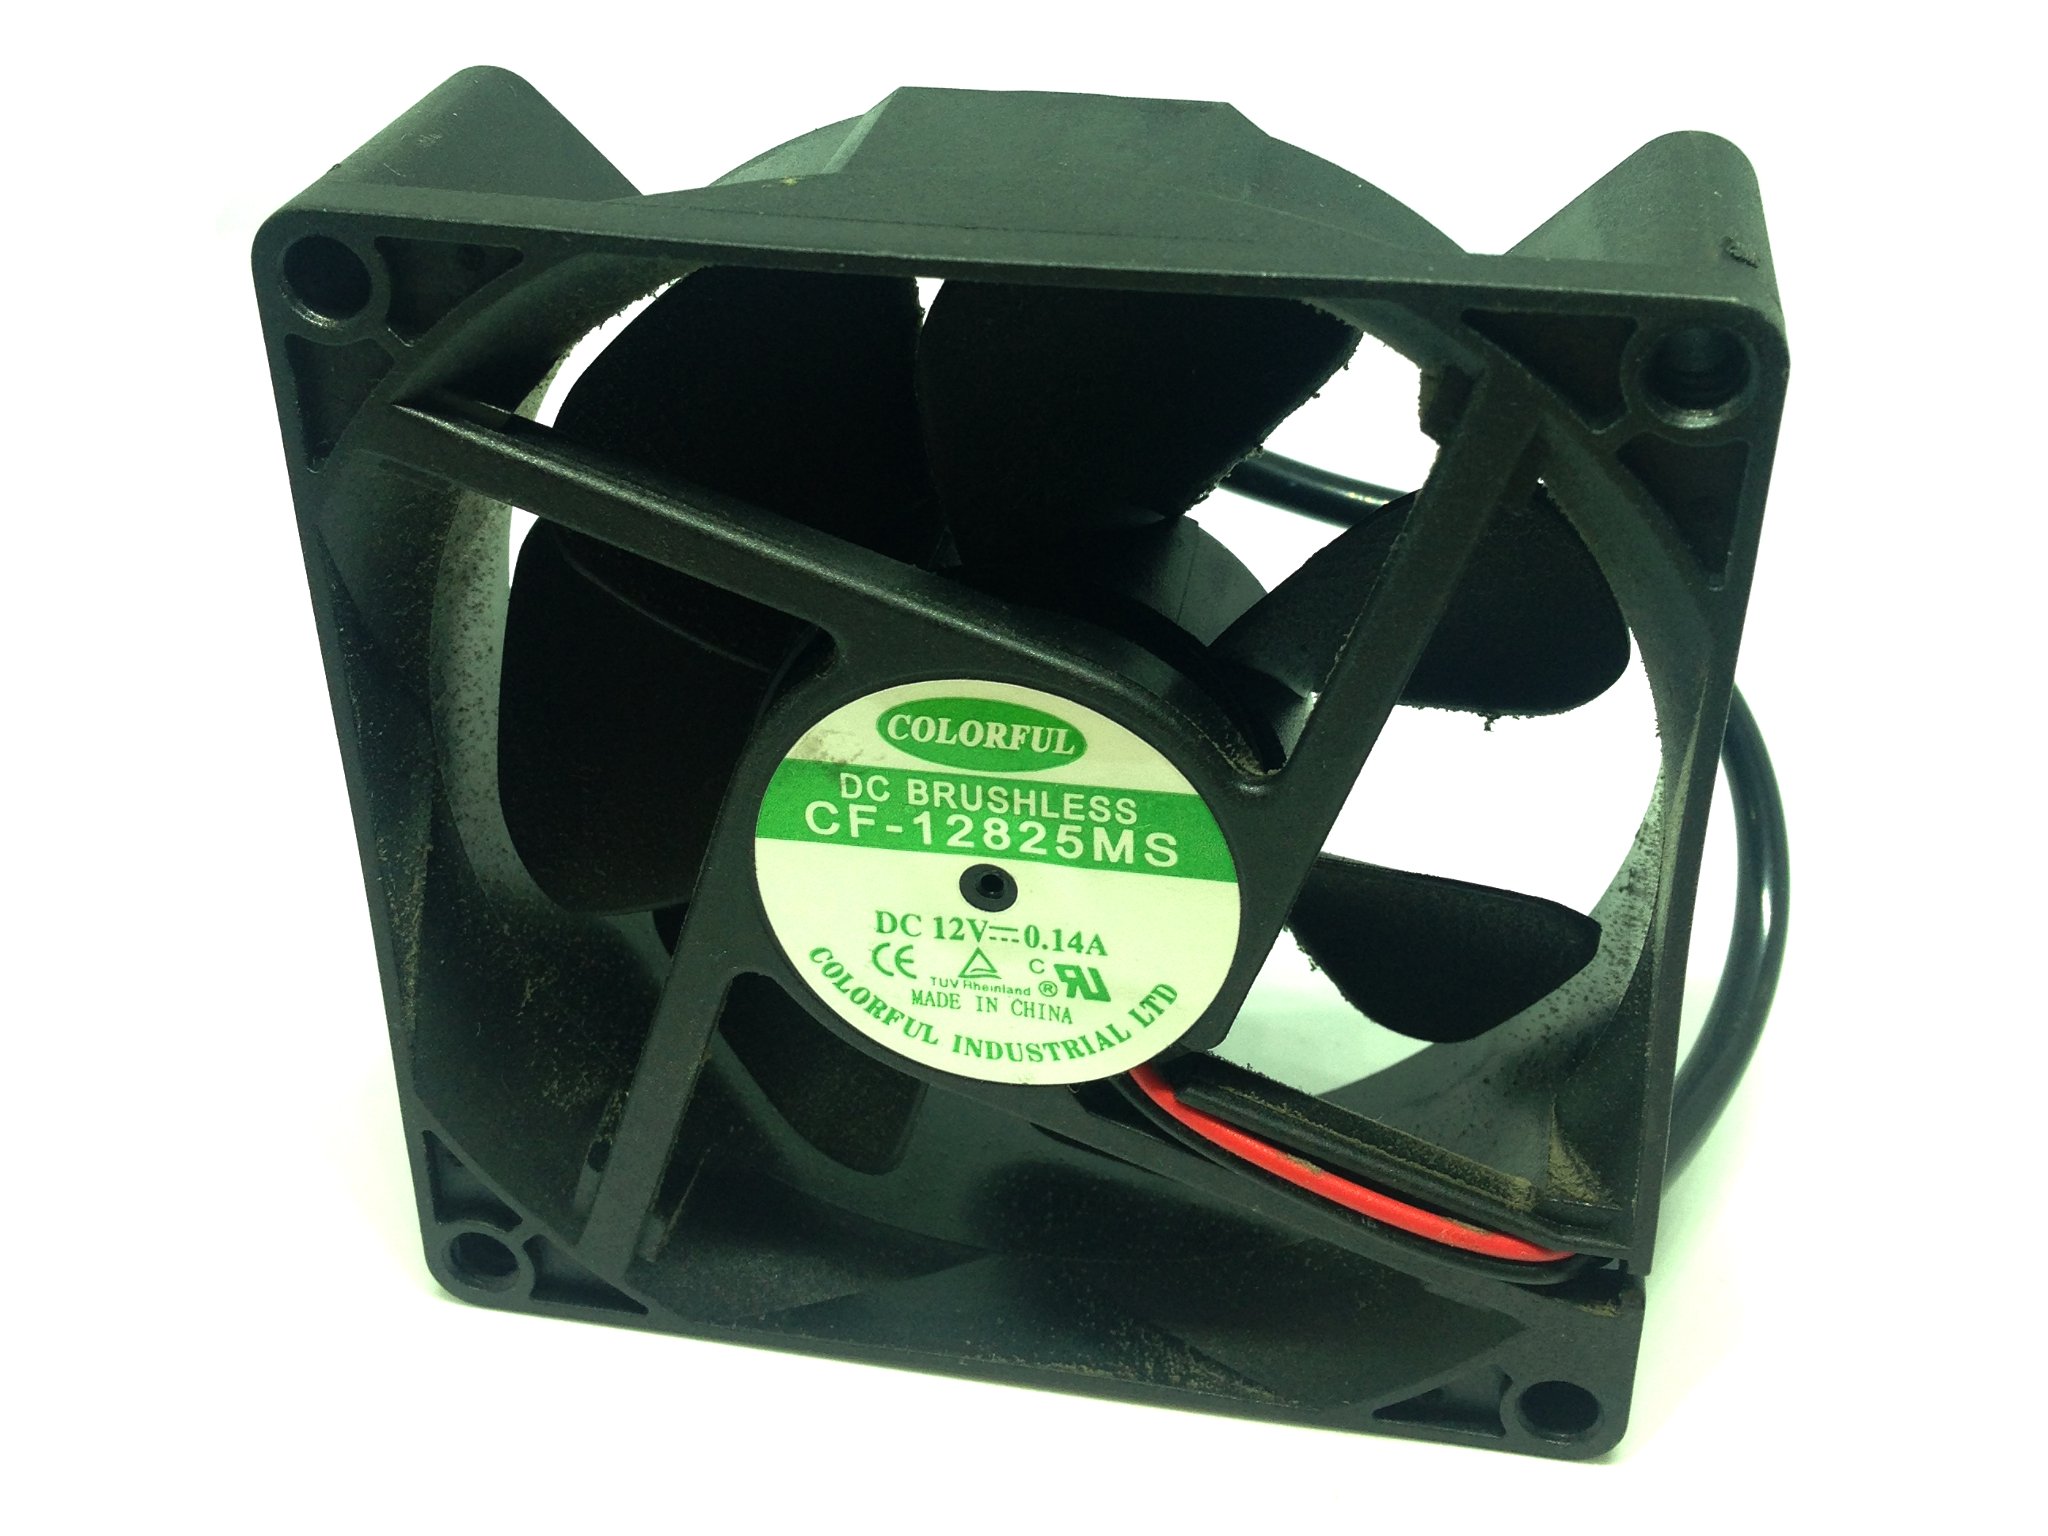 Colorful CF-12825MS 80x80x25mm Sleeve Axial L?fter Fan DC12V 0.14A mit Schraube